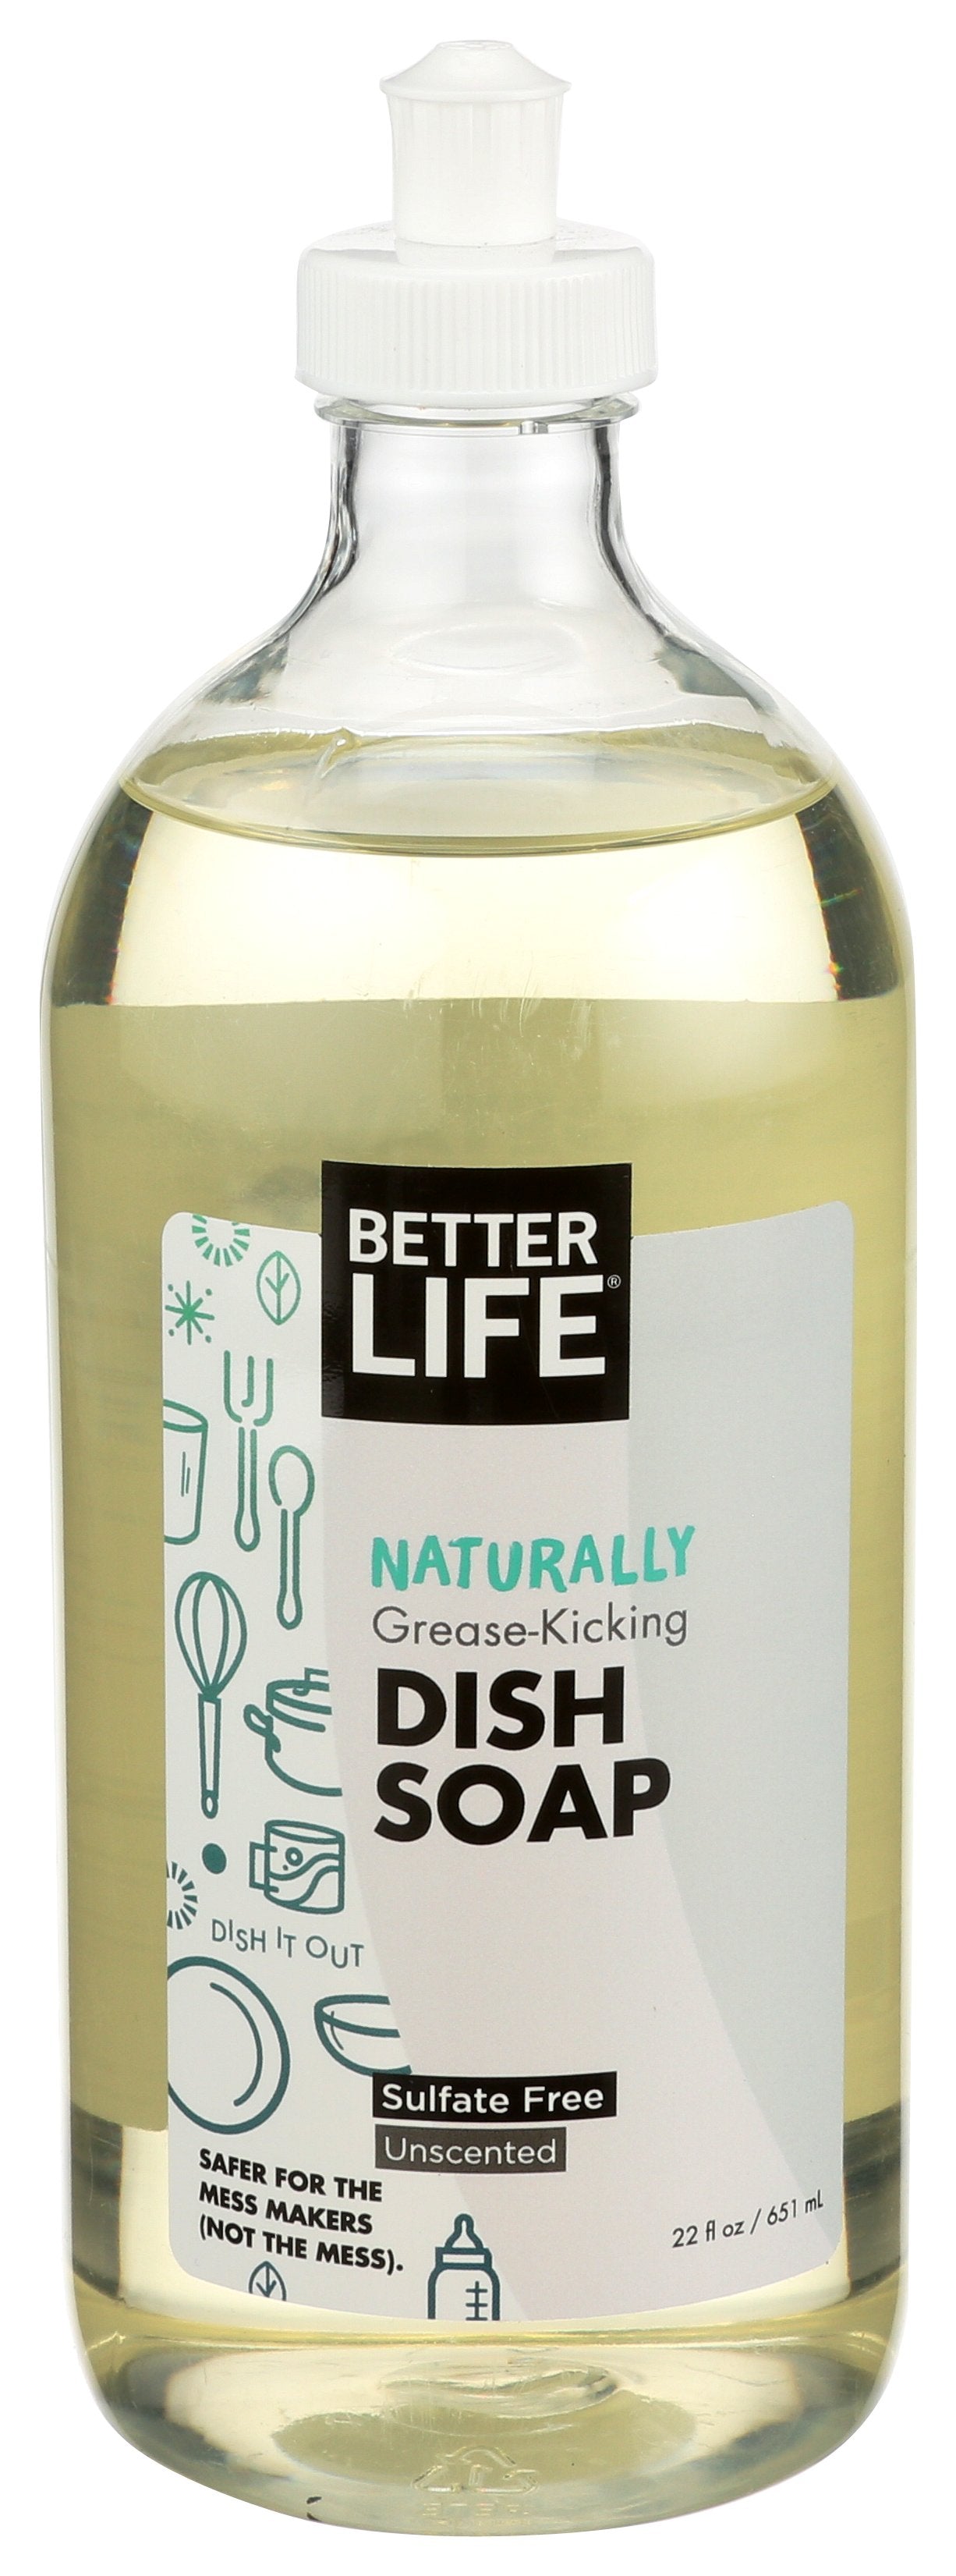 BETTER LIFE DISH SOAP UNSCENTED - Case of 6